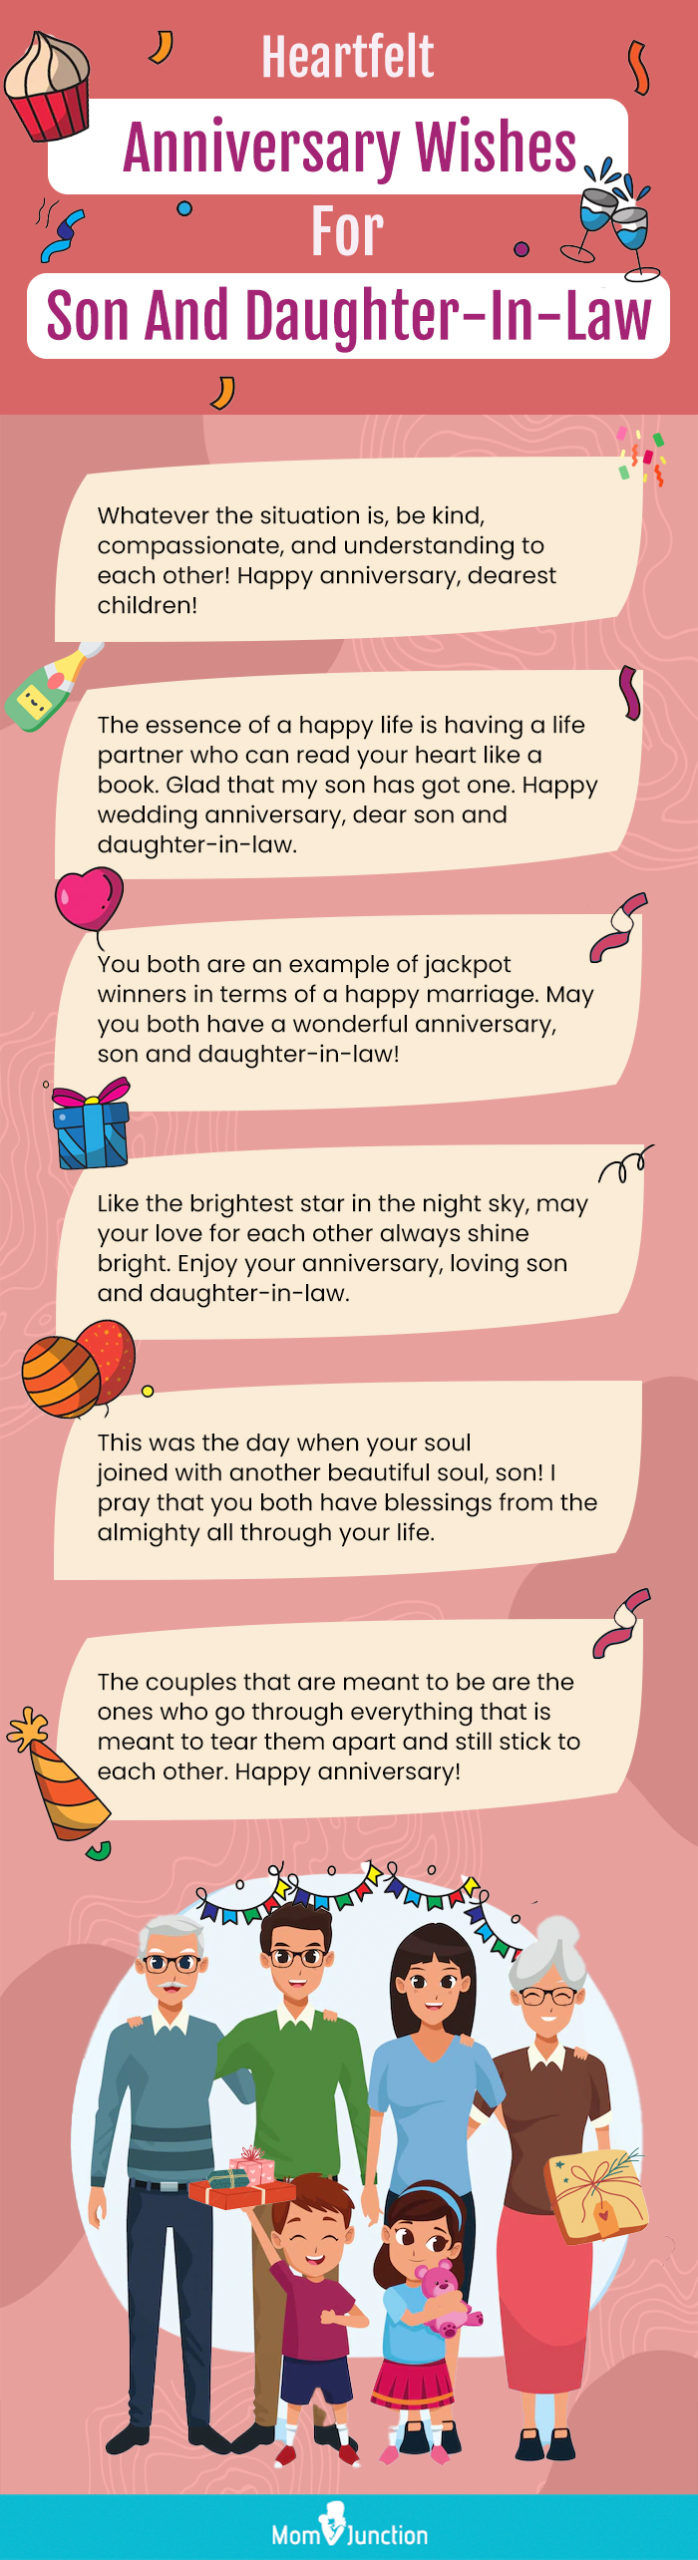 Wedding Anniversary Wishes: What To Write In A Heartfelt Card